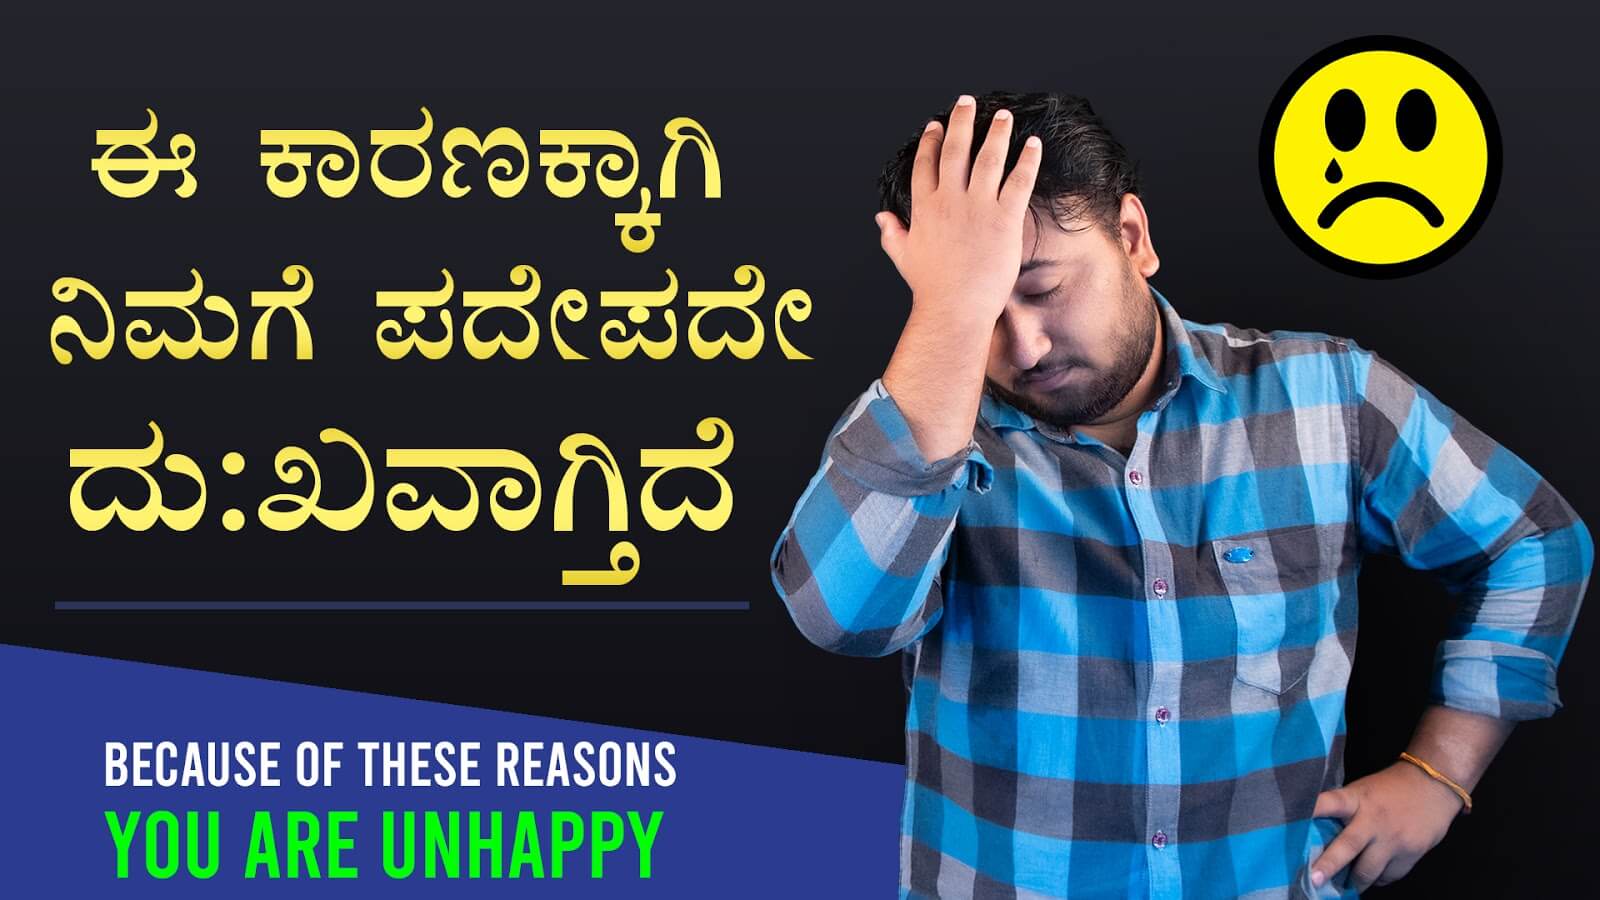 You are currently viewing ಈ ಕಾರಣಕ್ಕಾಗಿ ನಿಮಗೆ ಪದೇಪದೇ ದು:ಖವಾಗ್ತಿದೆ – Because of These Reasons you are Unhappy in Kannada